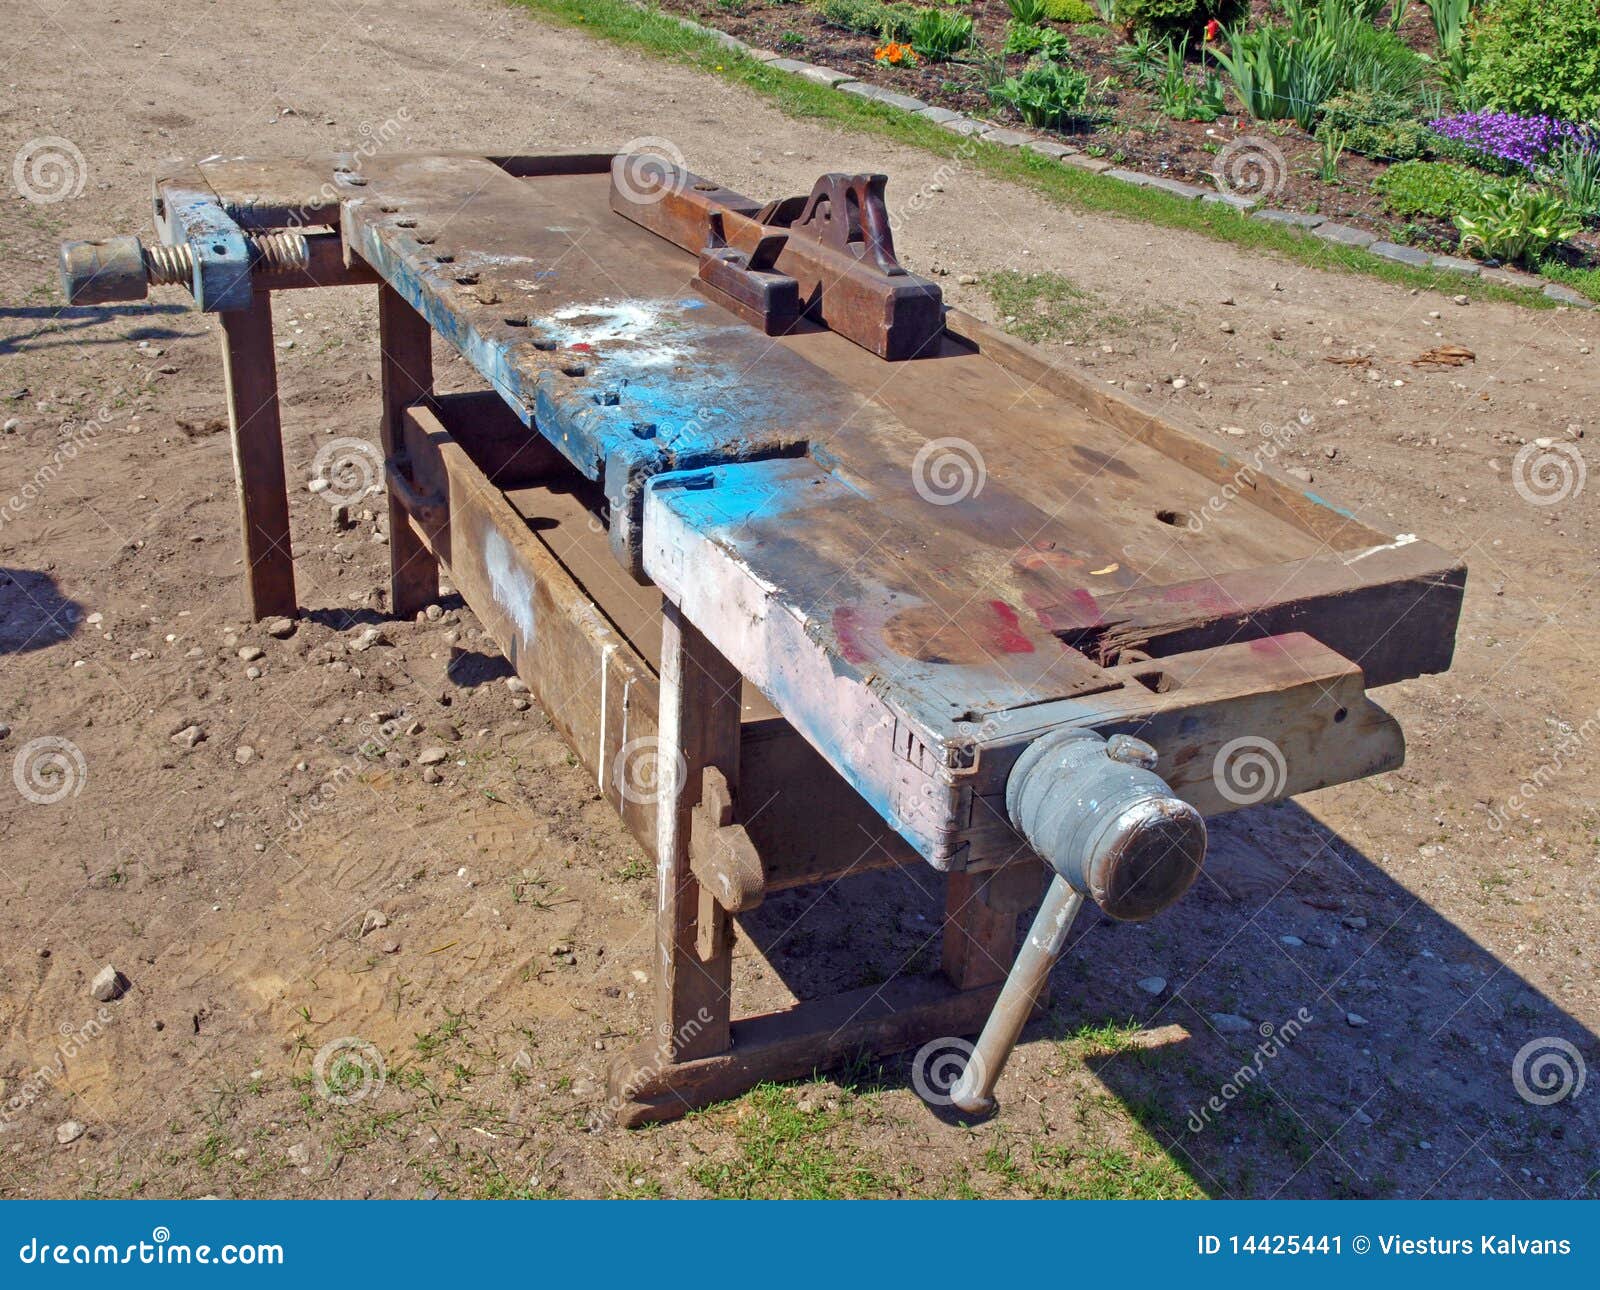 Woodworking bench stock image. Image of table, color